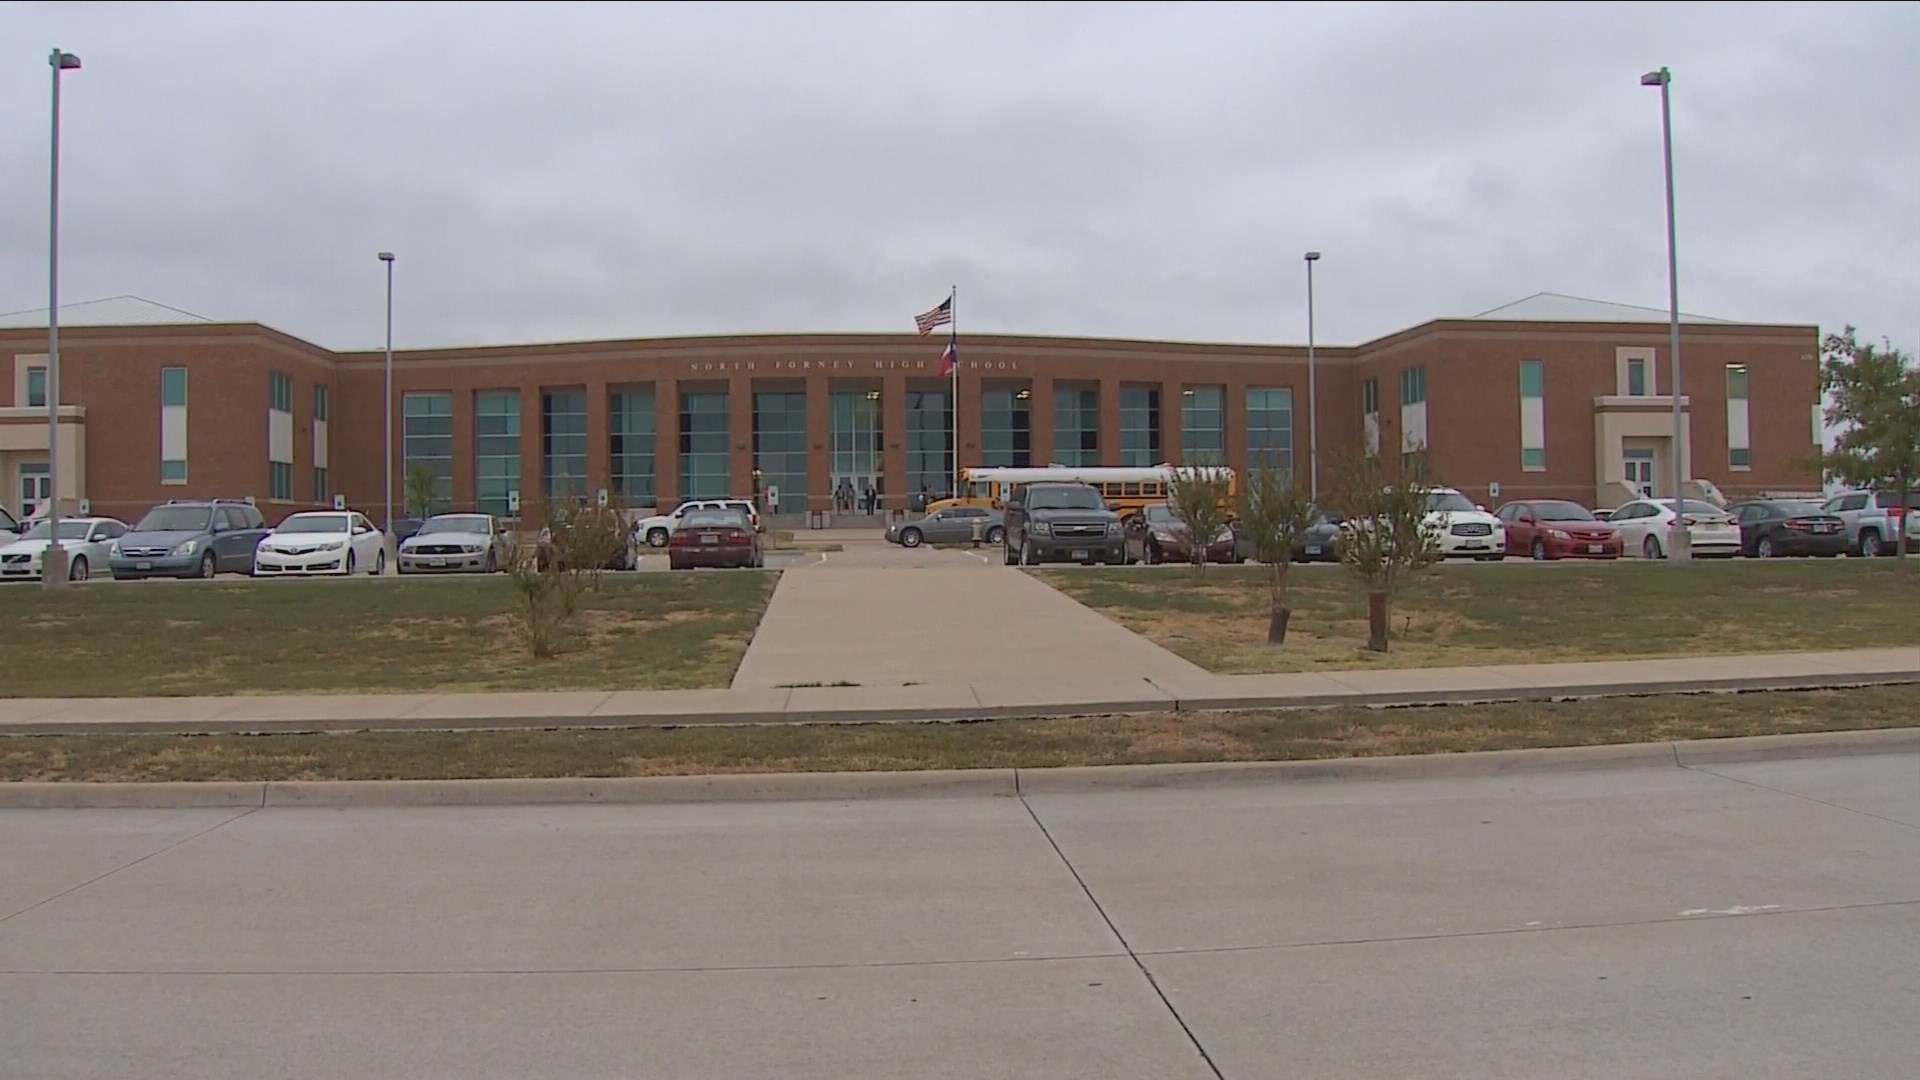 Teen arrested after alleged threat to Forney school